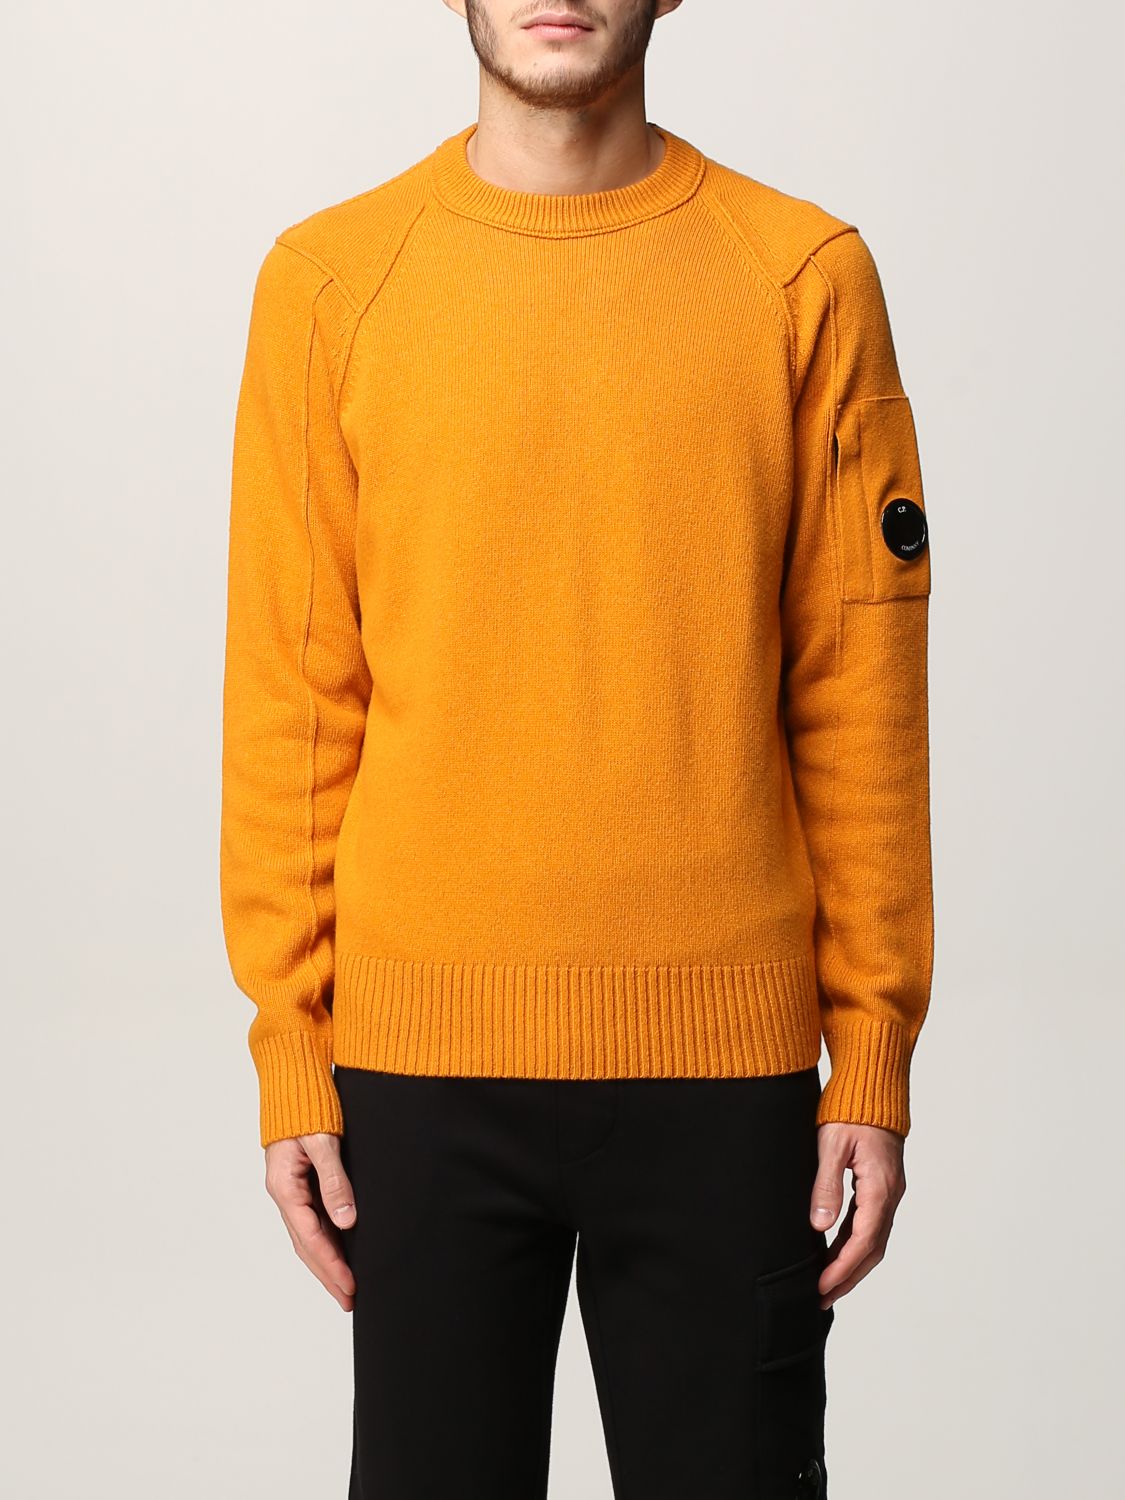 Reeve Sweater